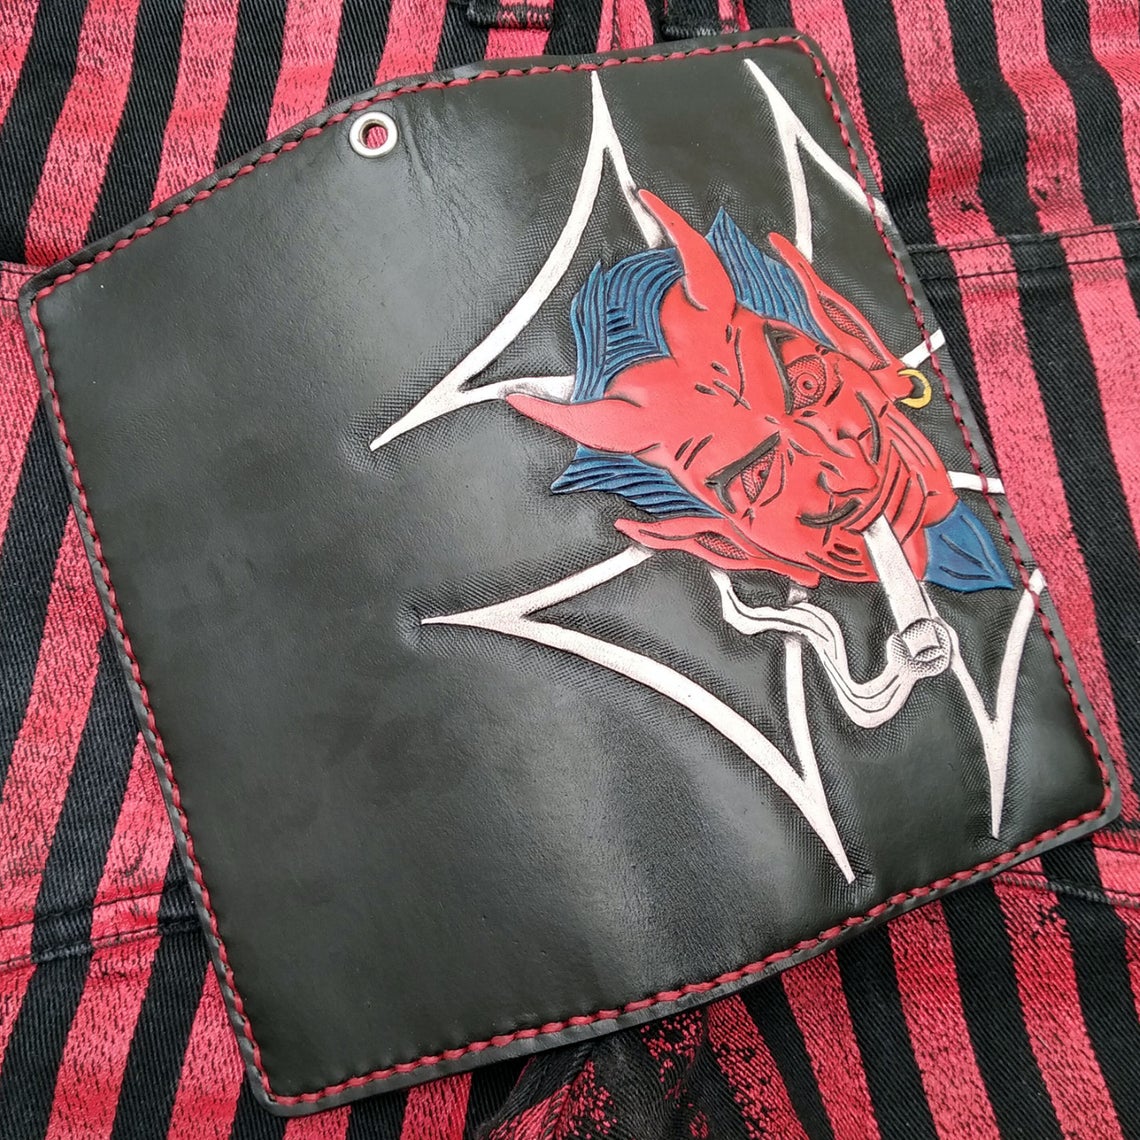 Biker-style wallet with engraved devil and flags by Another Way of Life